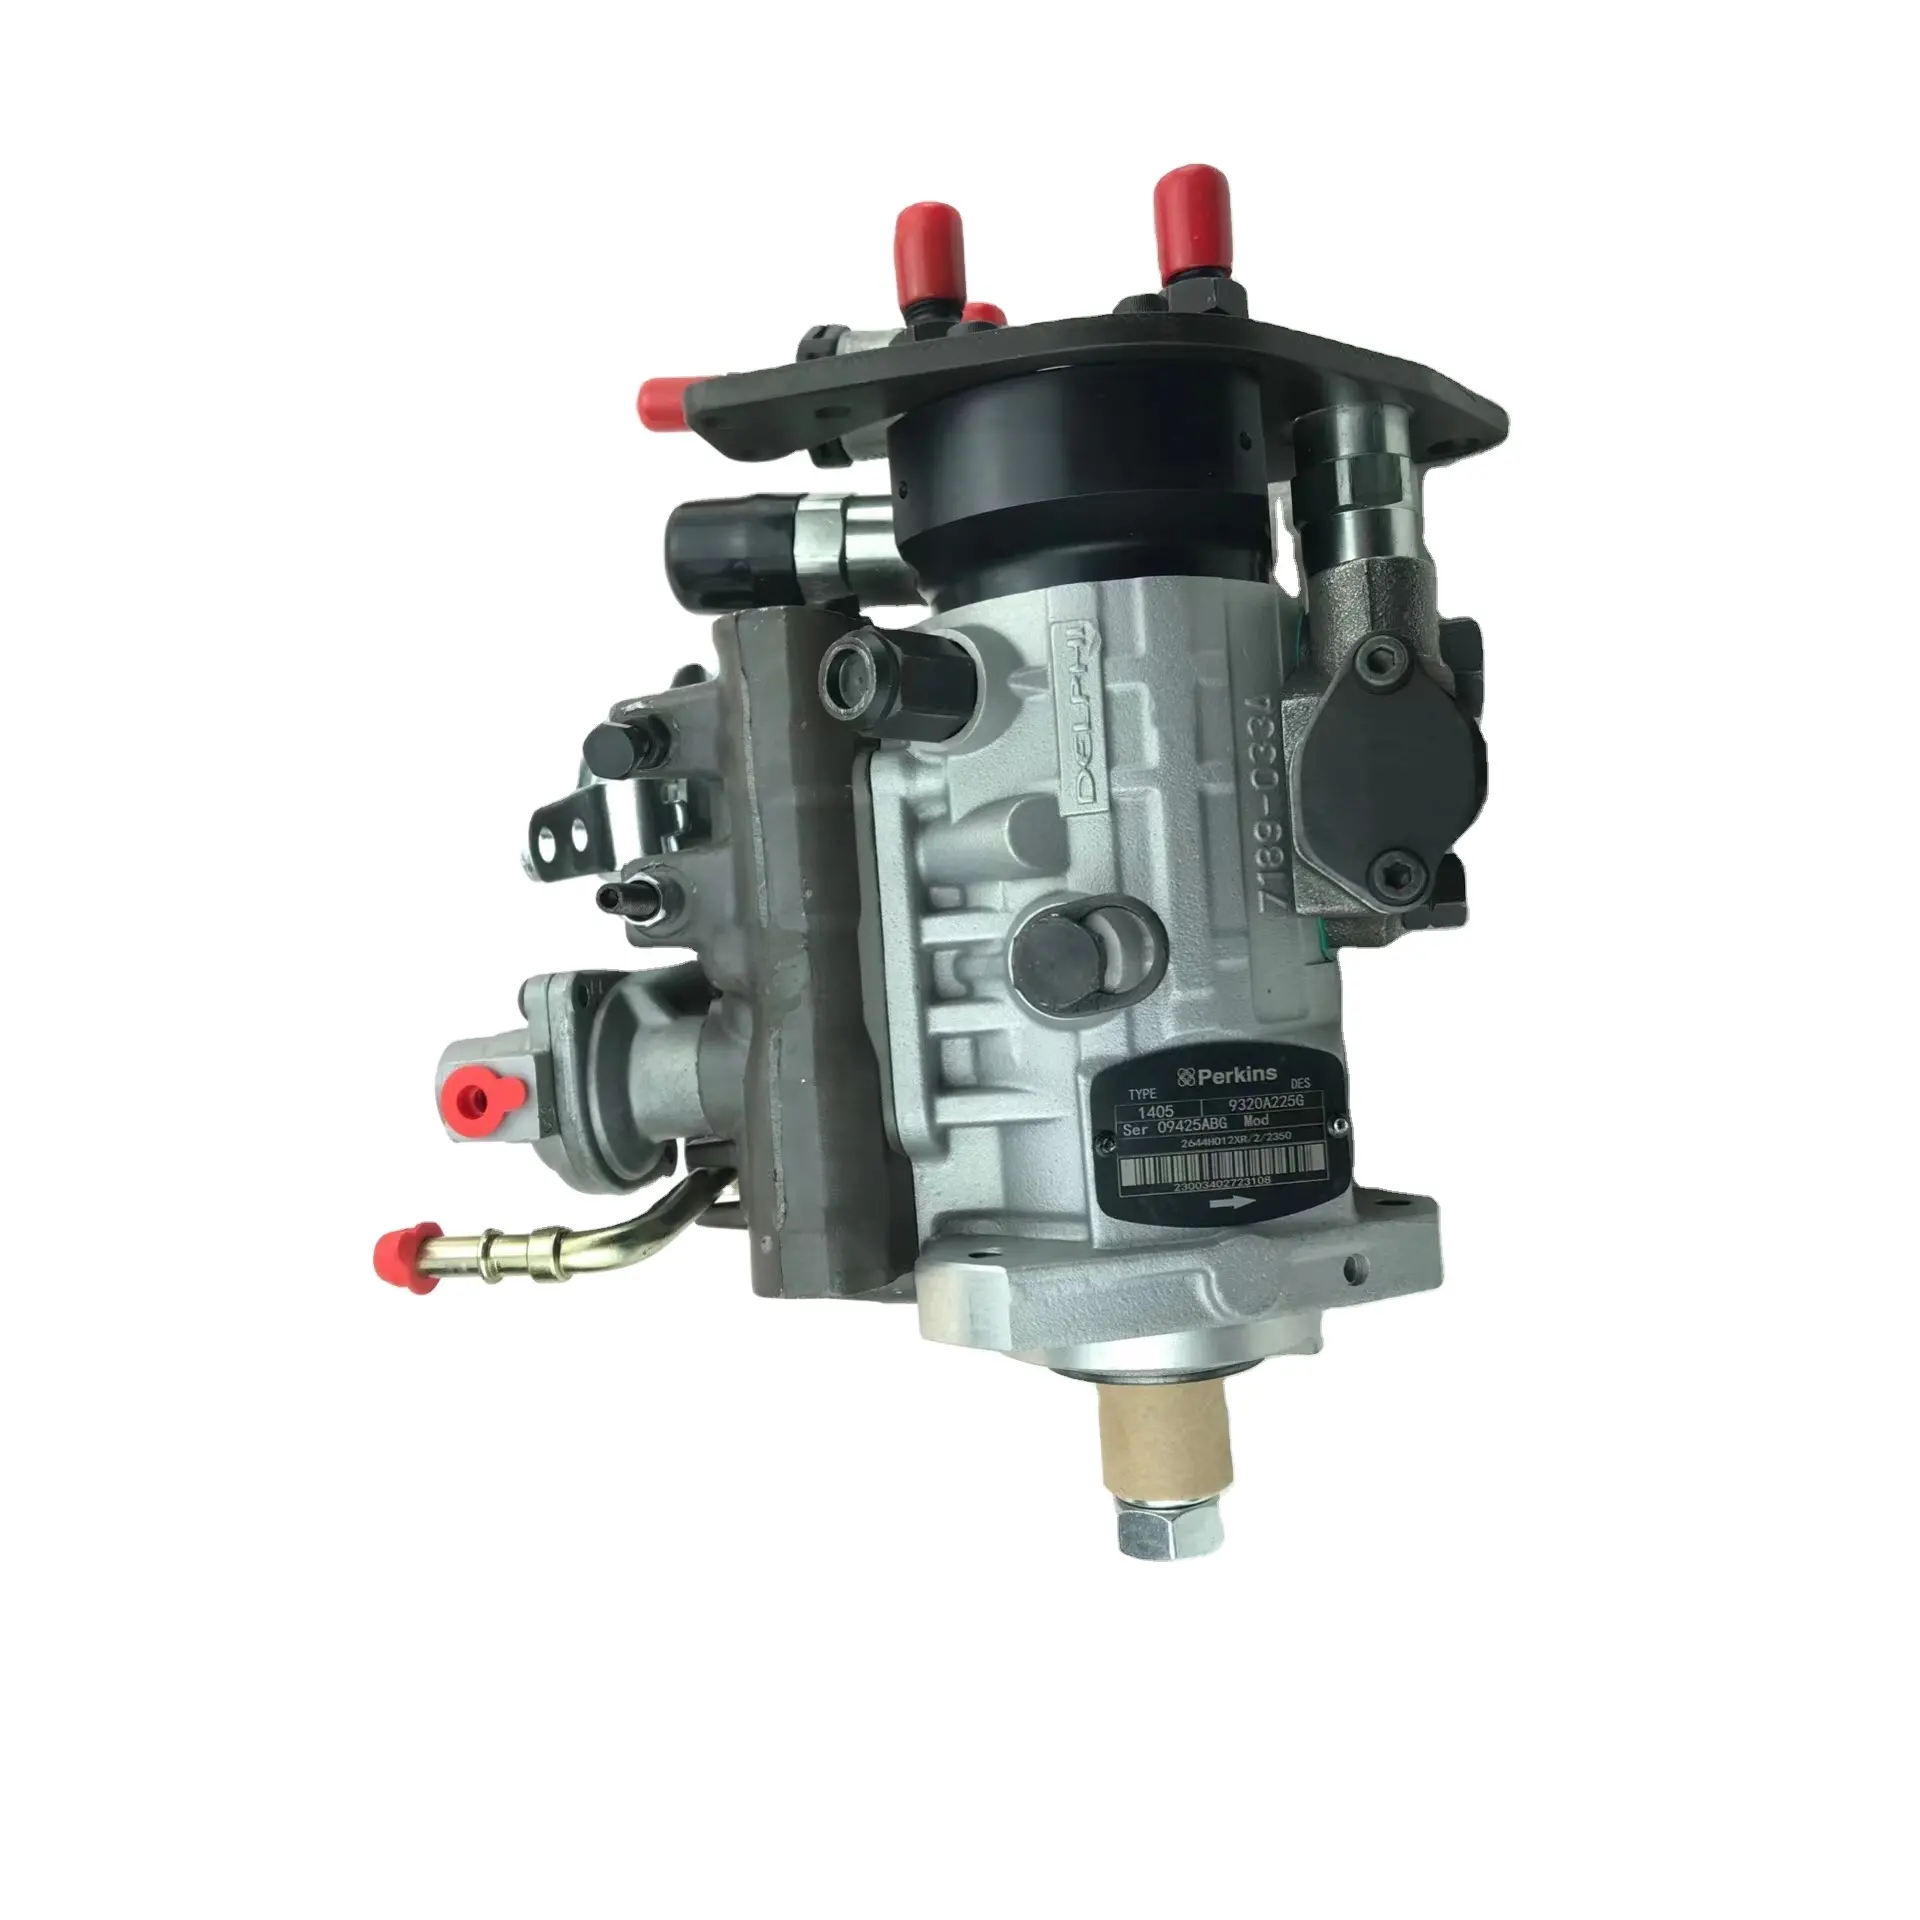 Diesel fuel injection pump/ 9320A225G/ Type 1405